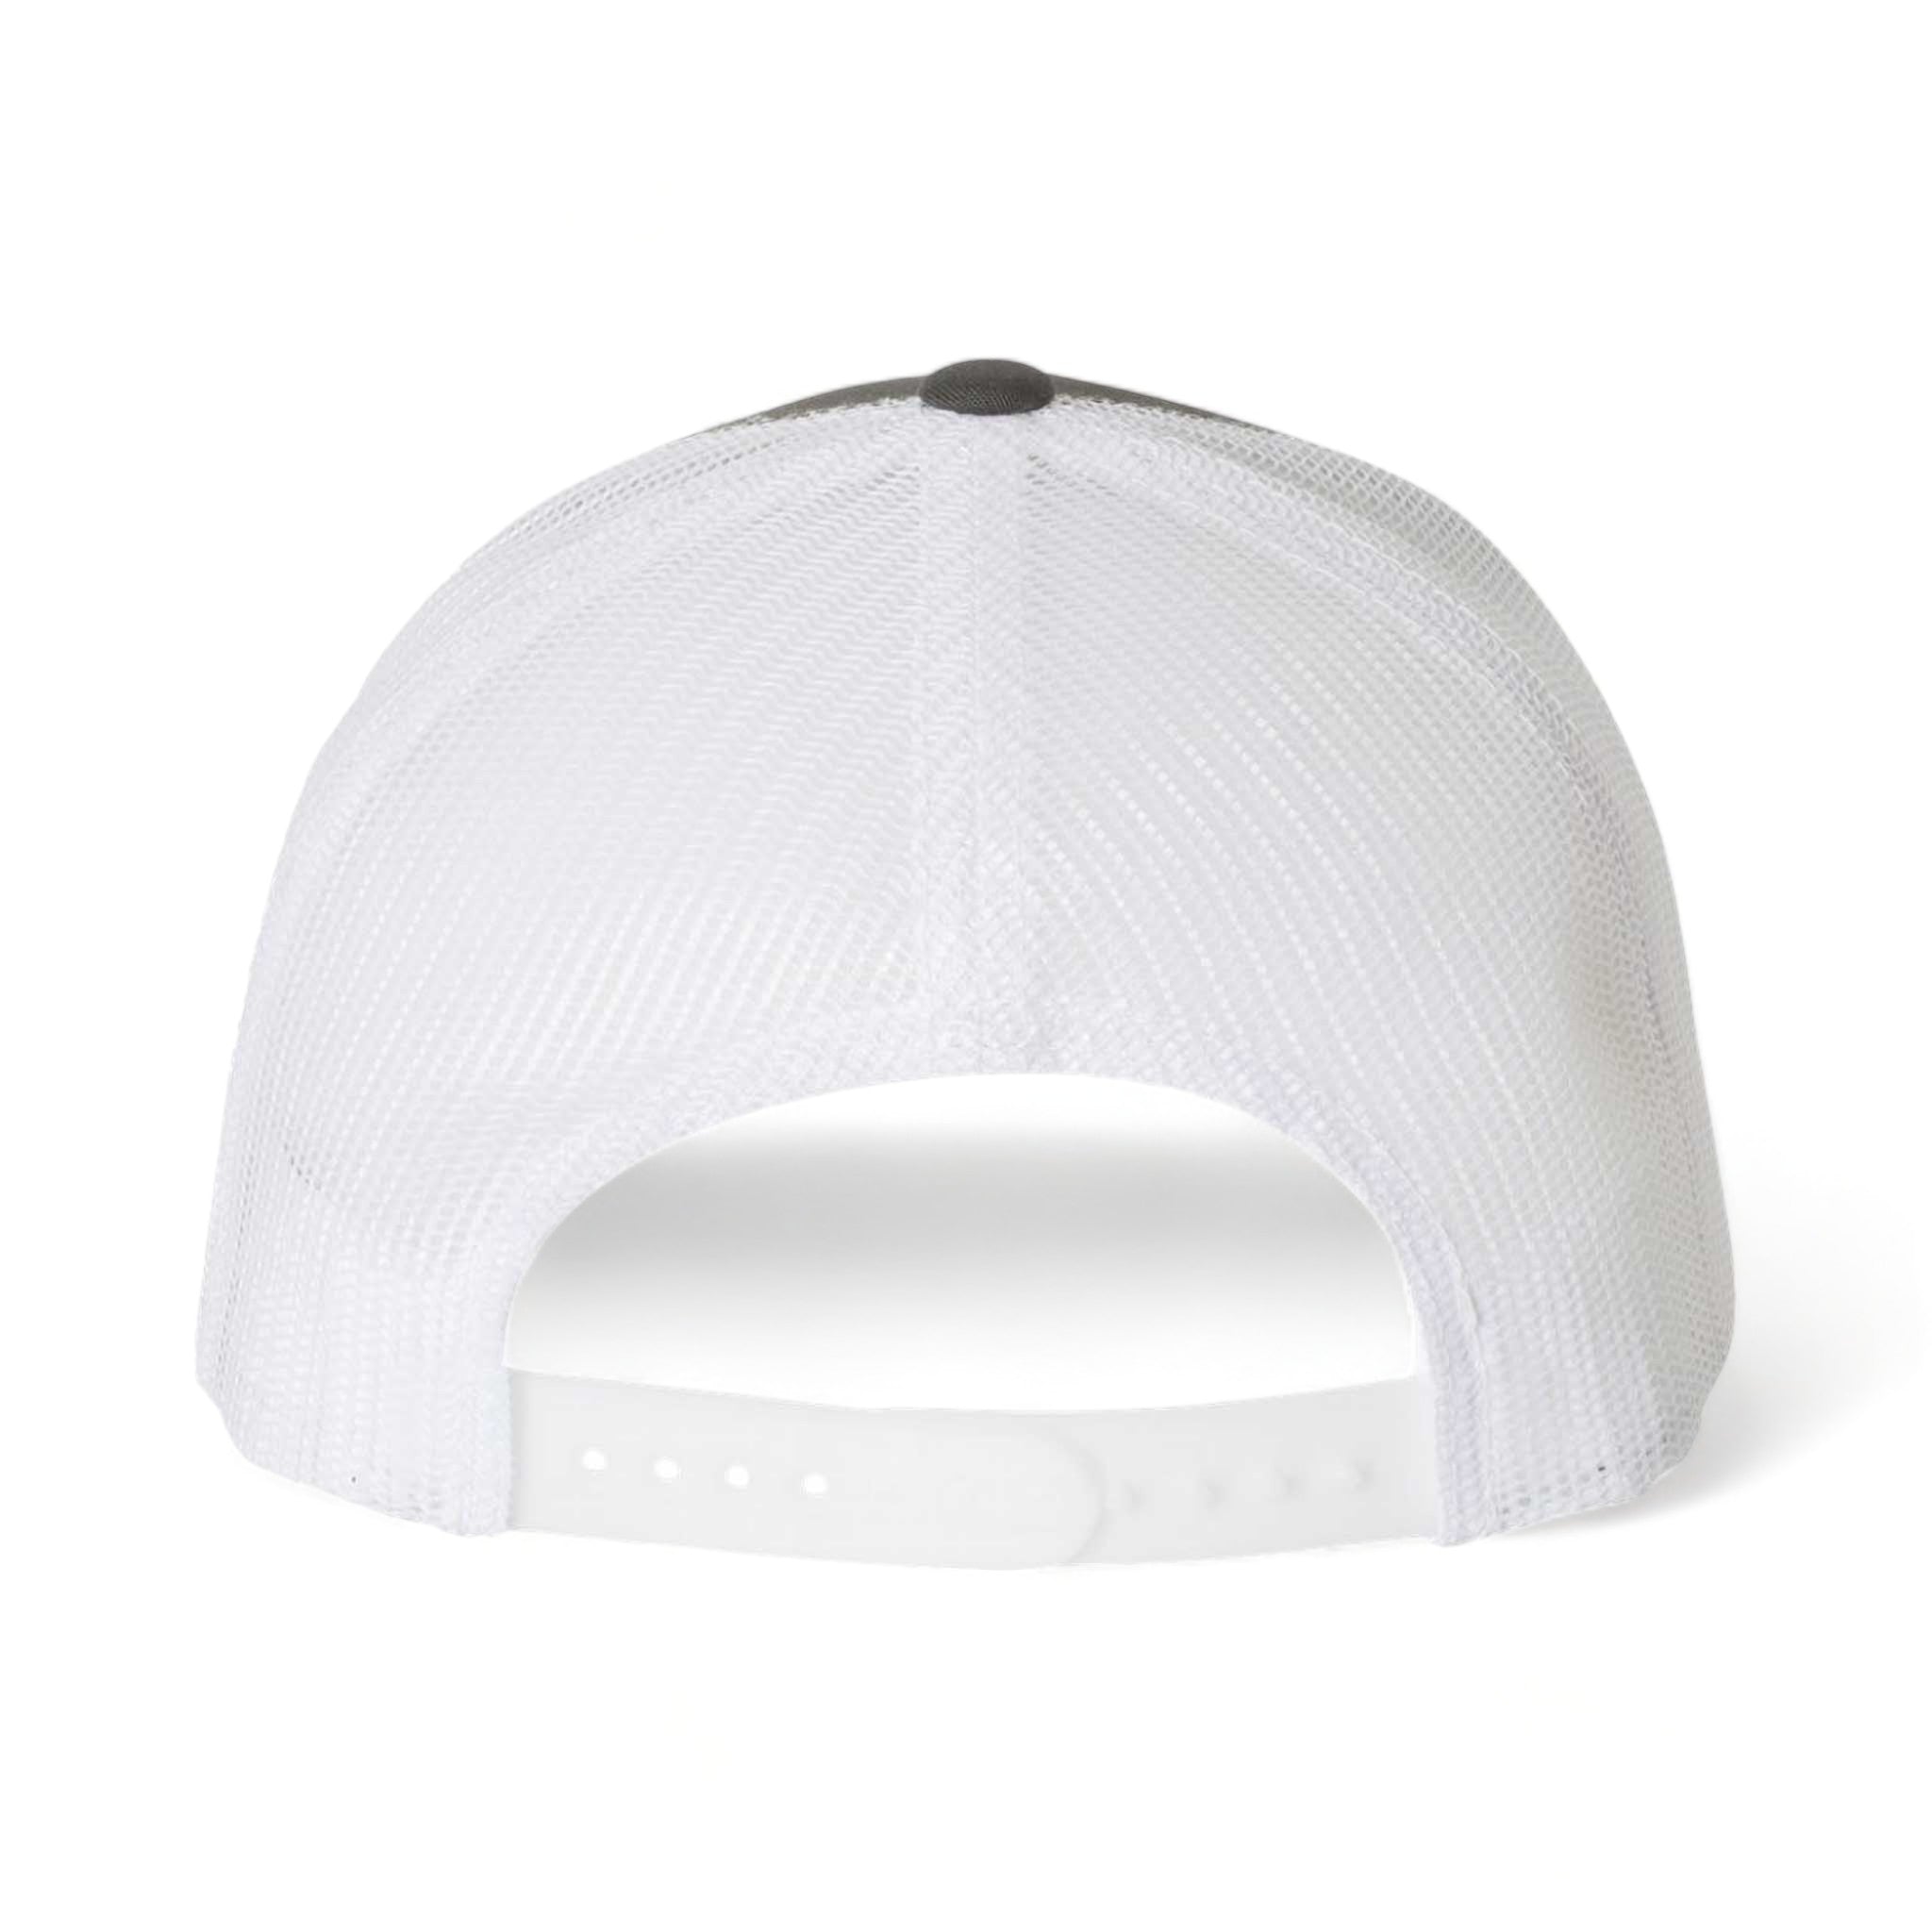 Back view of YP Classics 6606 custom hat in charcoal and white